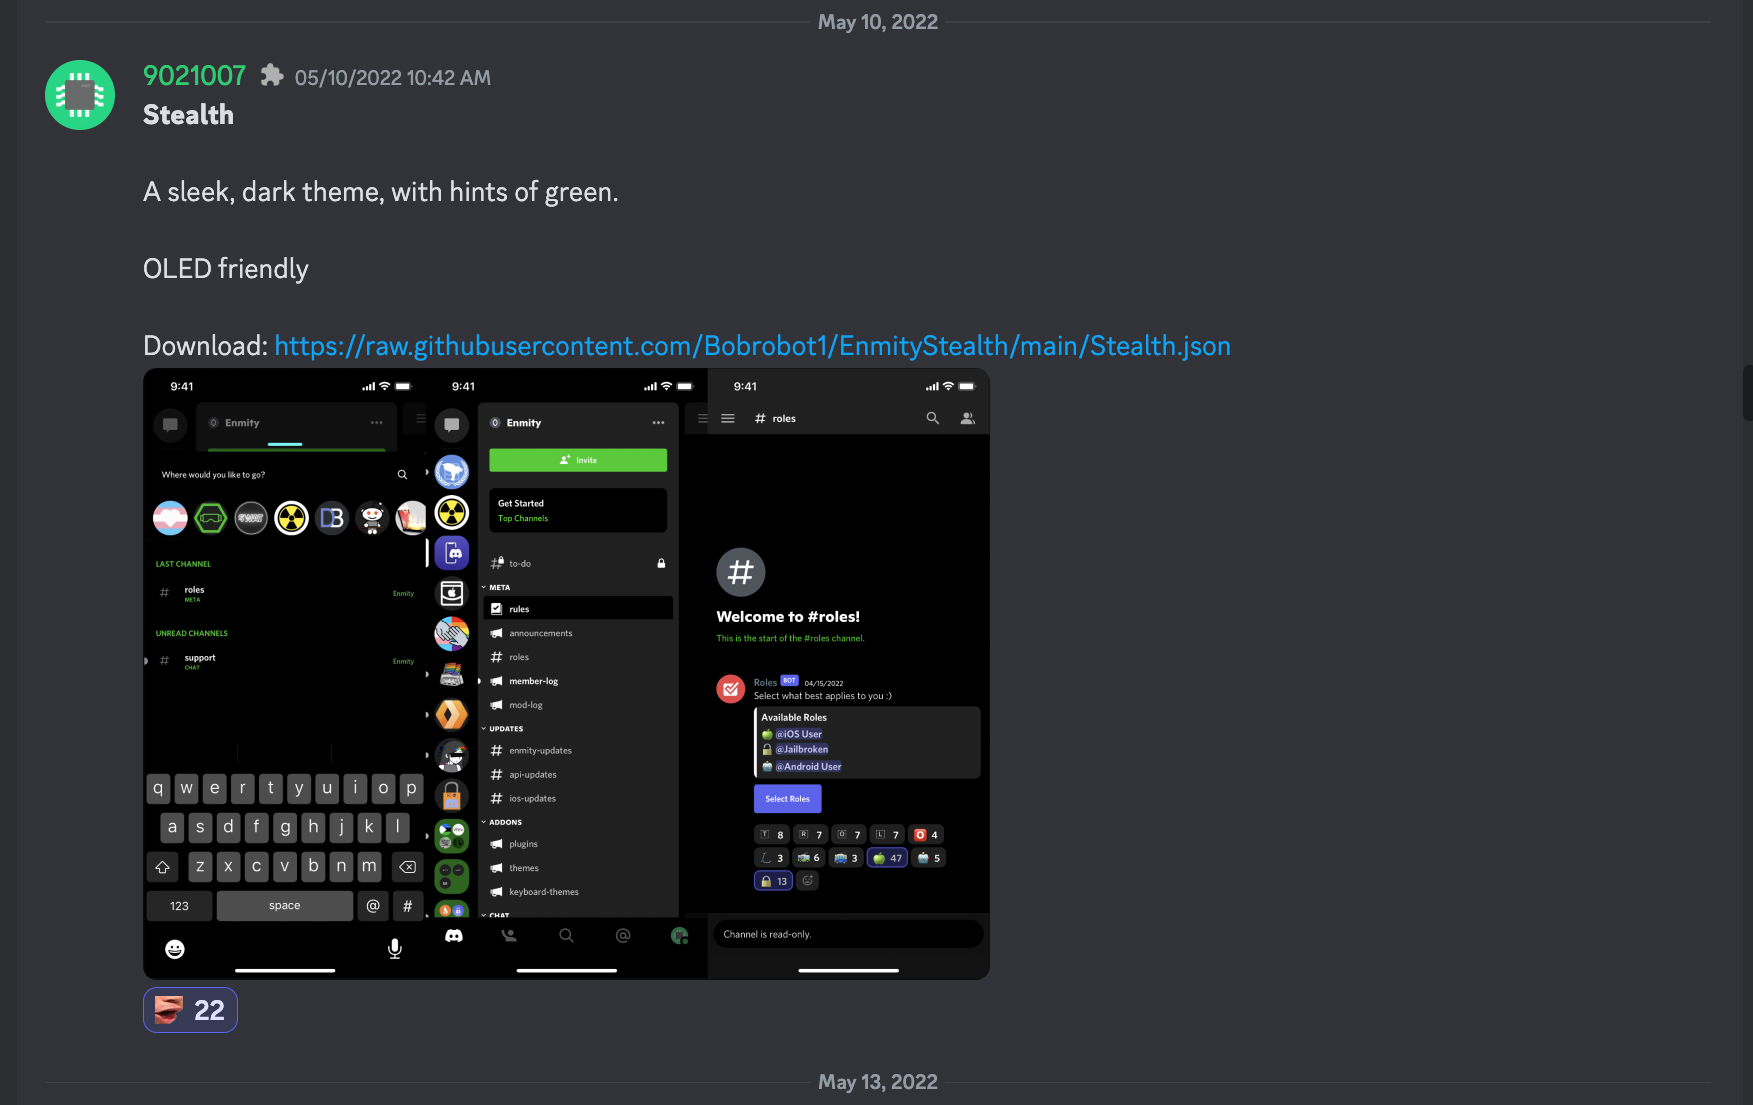 screenshot of a message in the Enmity Discord server, "Stealth  A sleek, dark theme, with hints of green.  OLED friendly". The message has 3 attachments, which are screenshots of the theme. The message was sent 05/10/2022